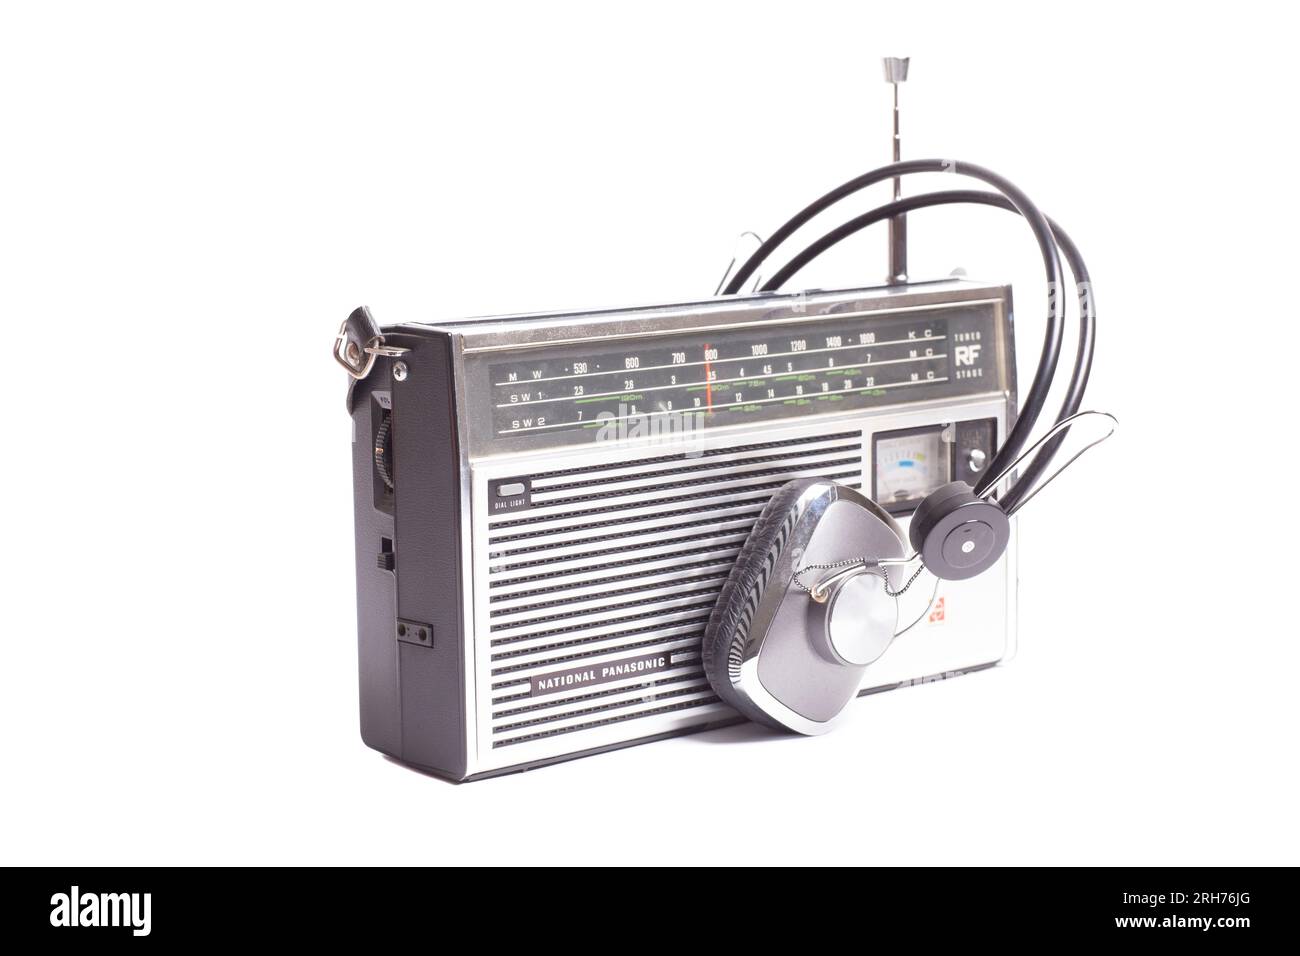 Moscow, Russia, August 05, 2023: National Panasonic,super sensitive radio receiver with headphones. Stock Photo